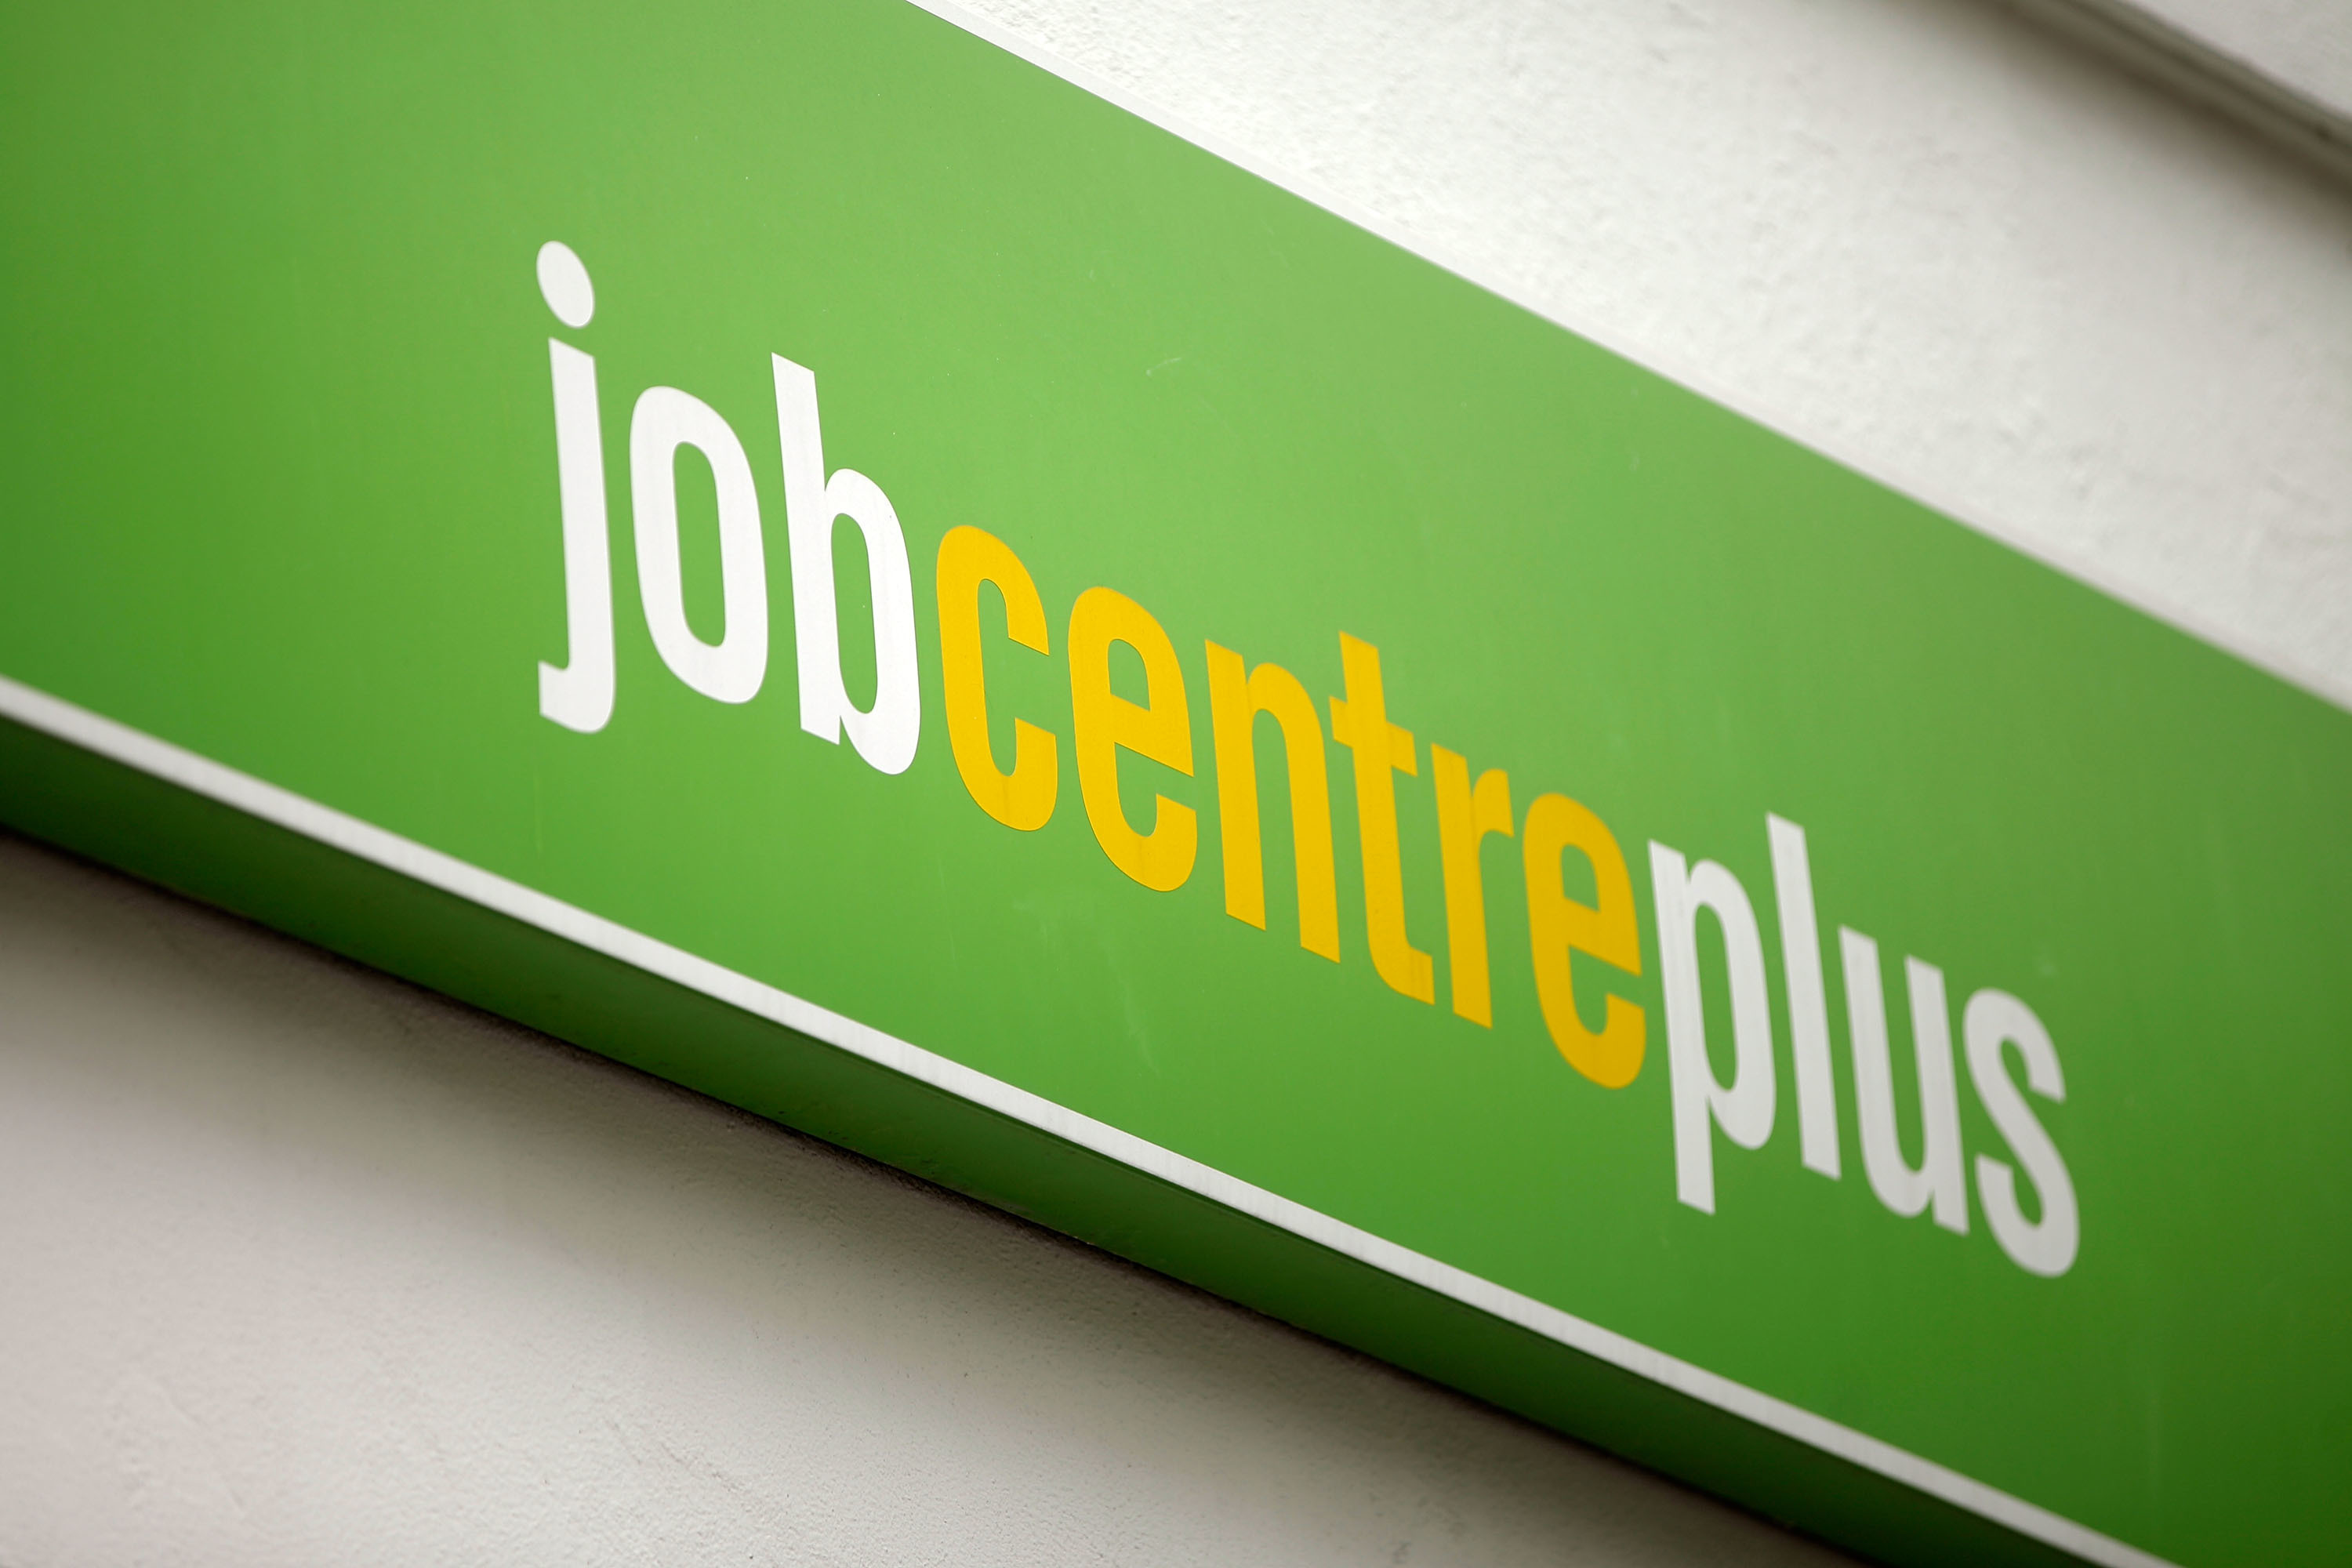 Scotland saw the steepest drop in permanent job placements since 2009.